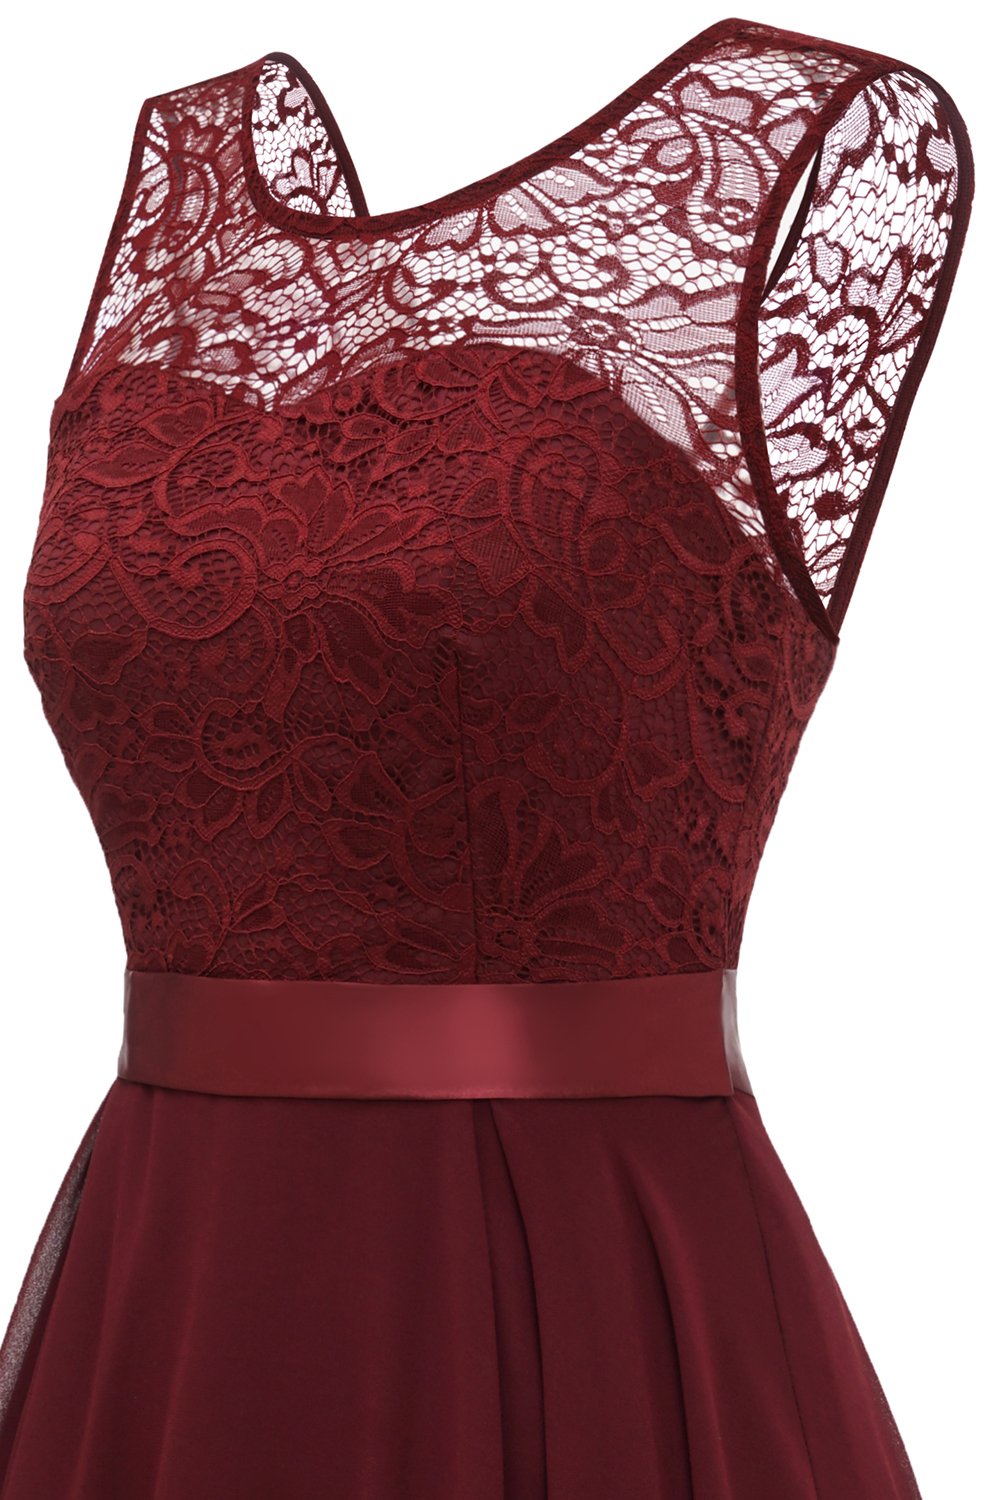 High Low Round Neck Burgundy Lace Dress with Bowknot